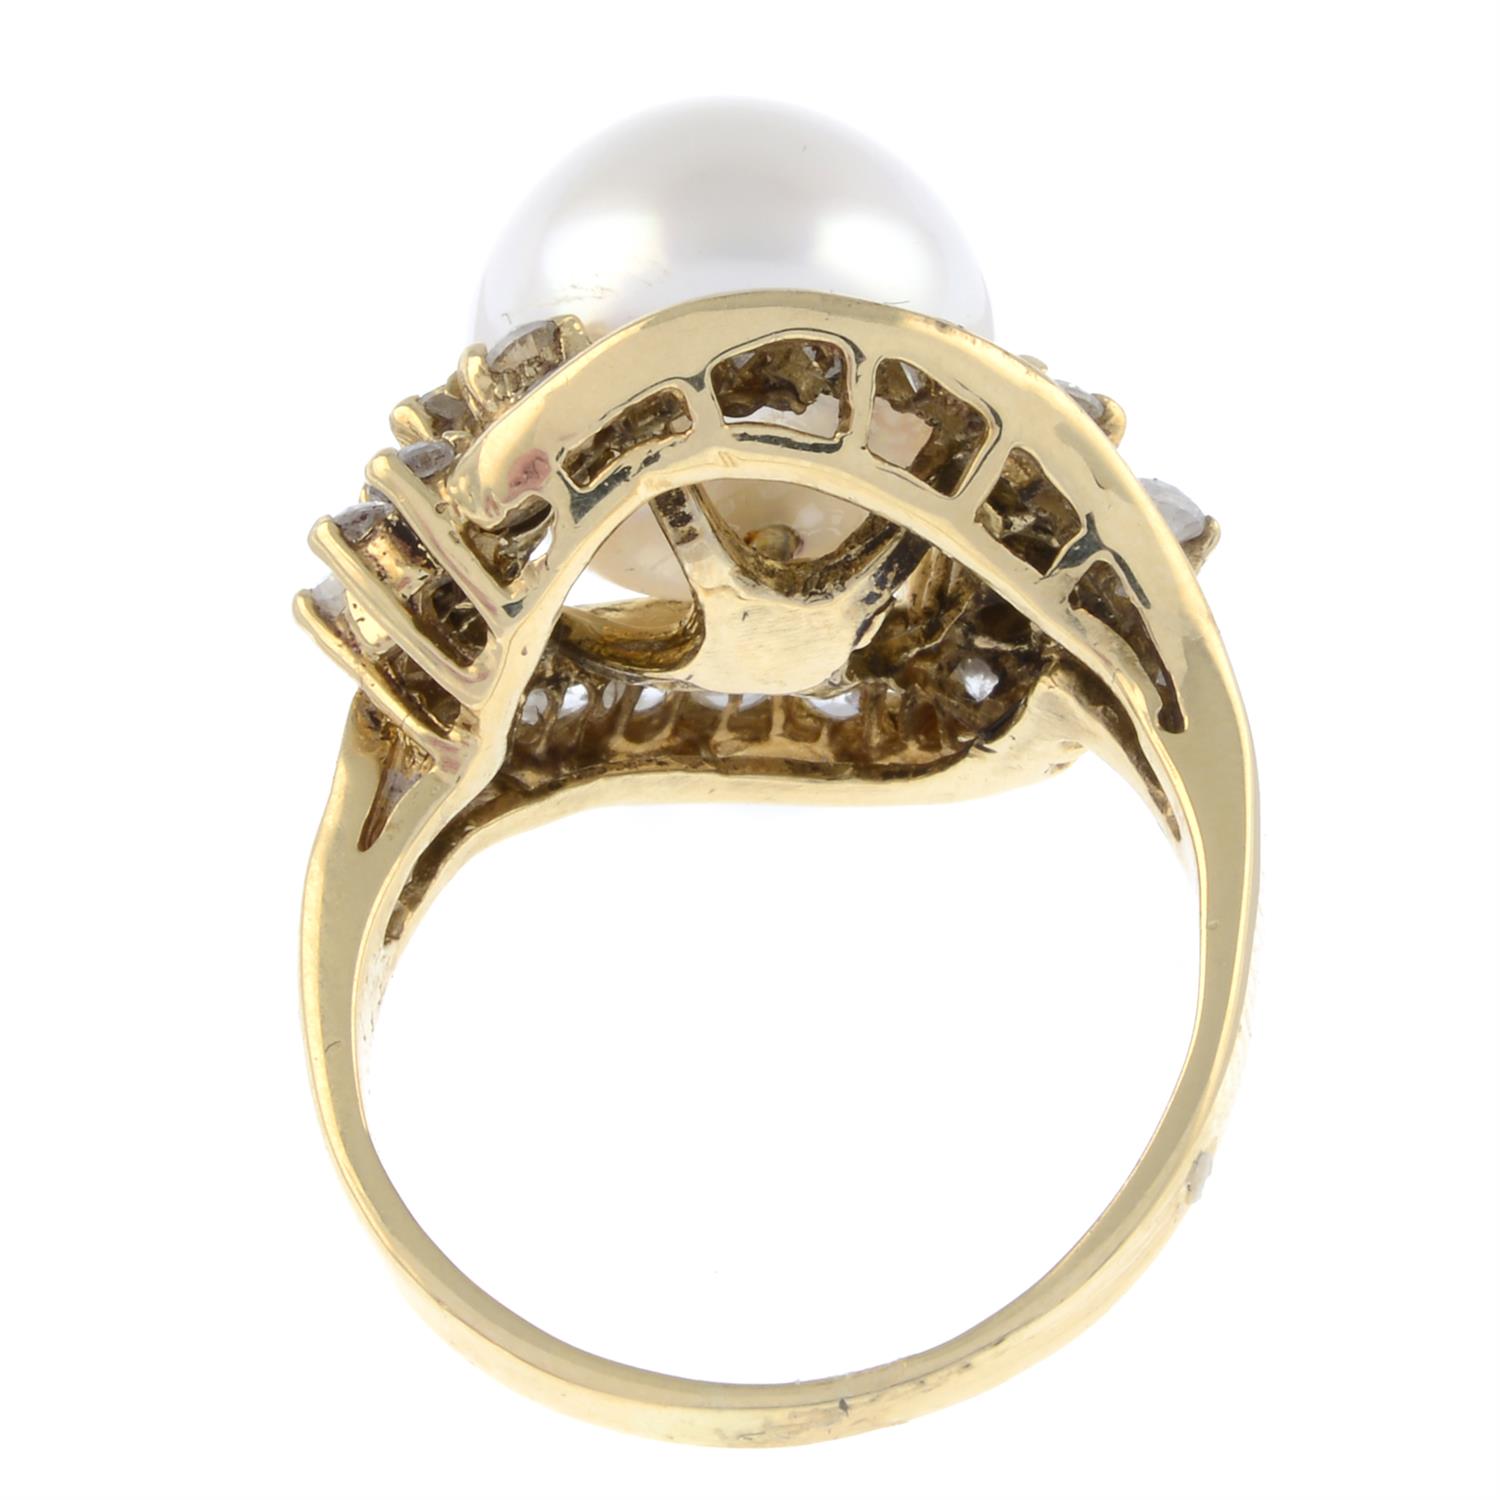 Cultured pearl & gem ring - Image 2 of 2